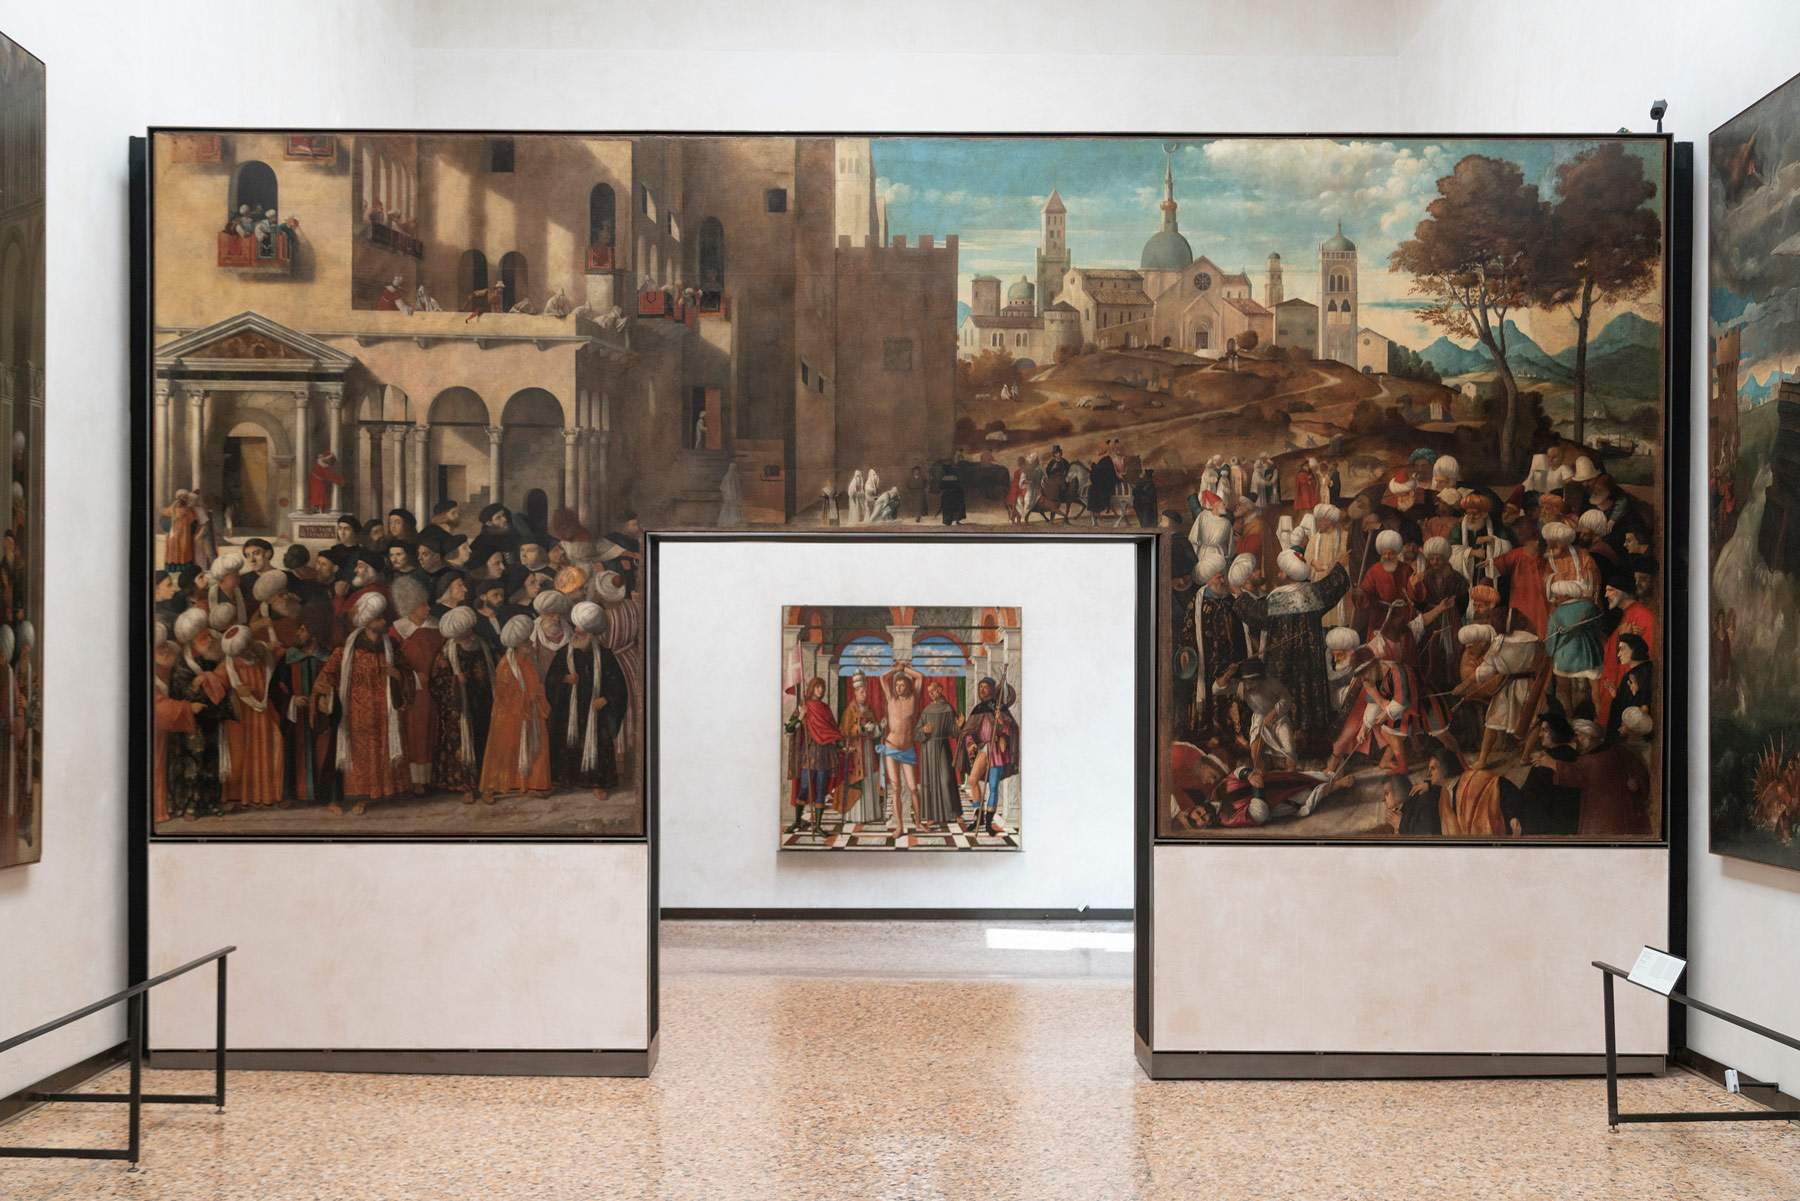 New rooms of the sixteenth century open at the Gallerie dell'Accademia in Venice. Photos